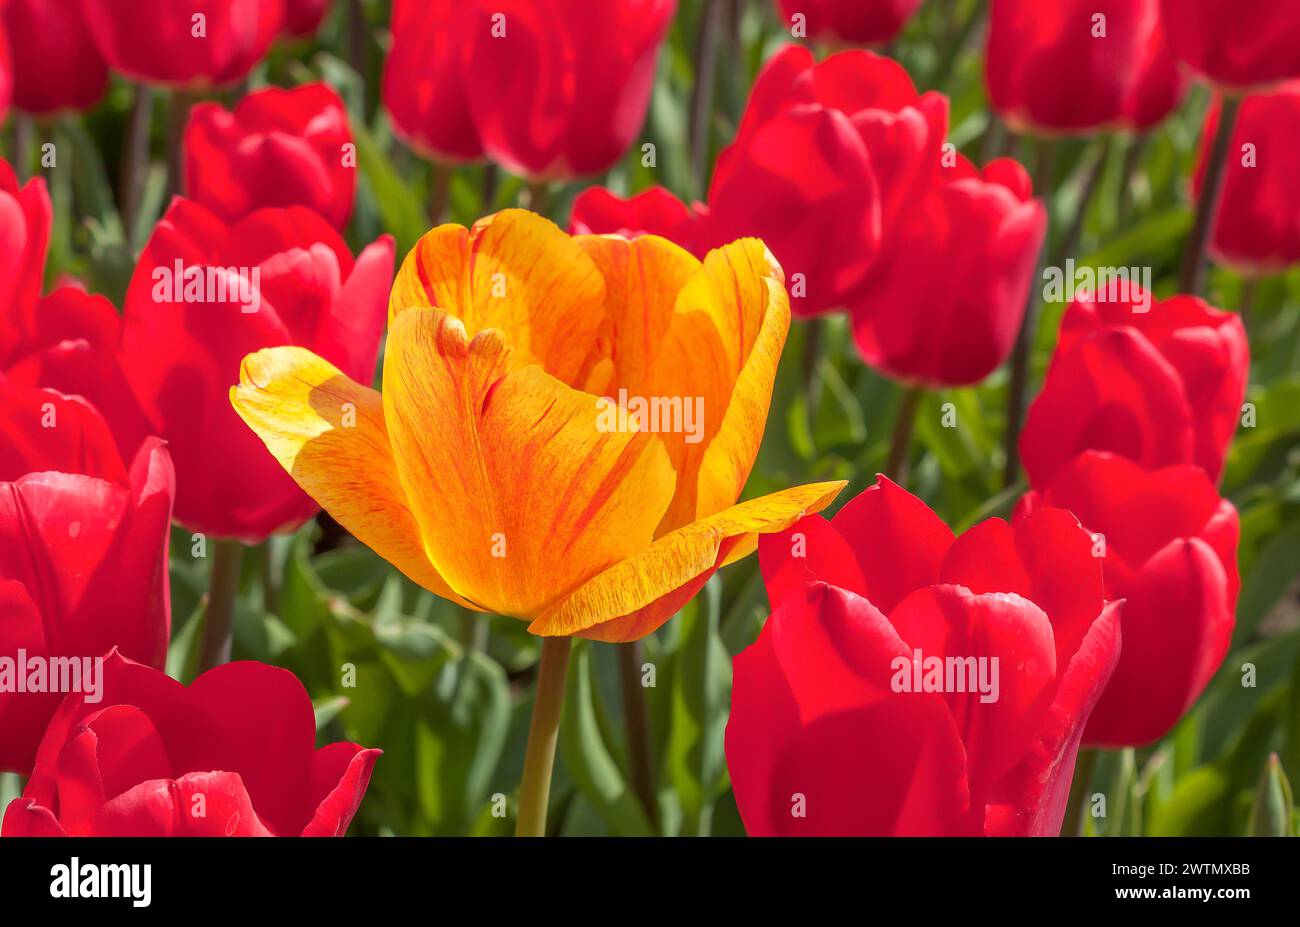 Colorful tulip flowers closeup. One yellow tulip among red ones in a spring field. Stock Photo